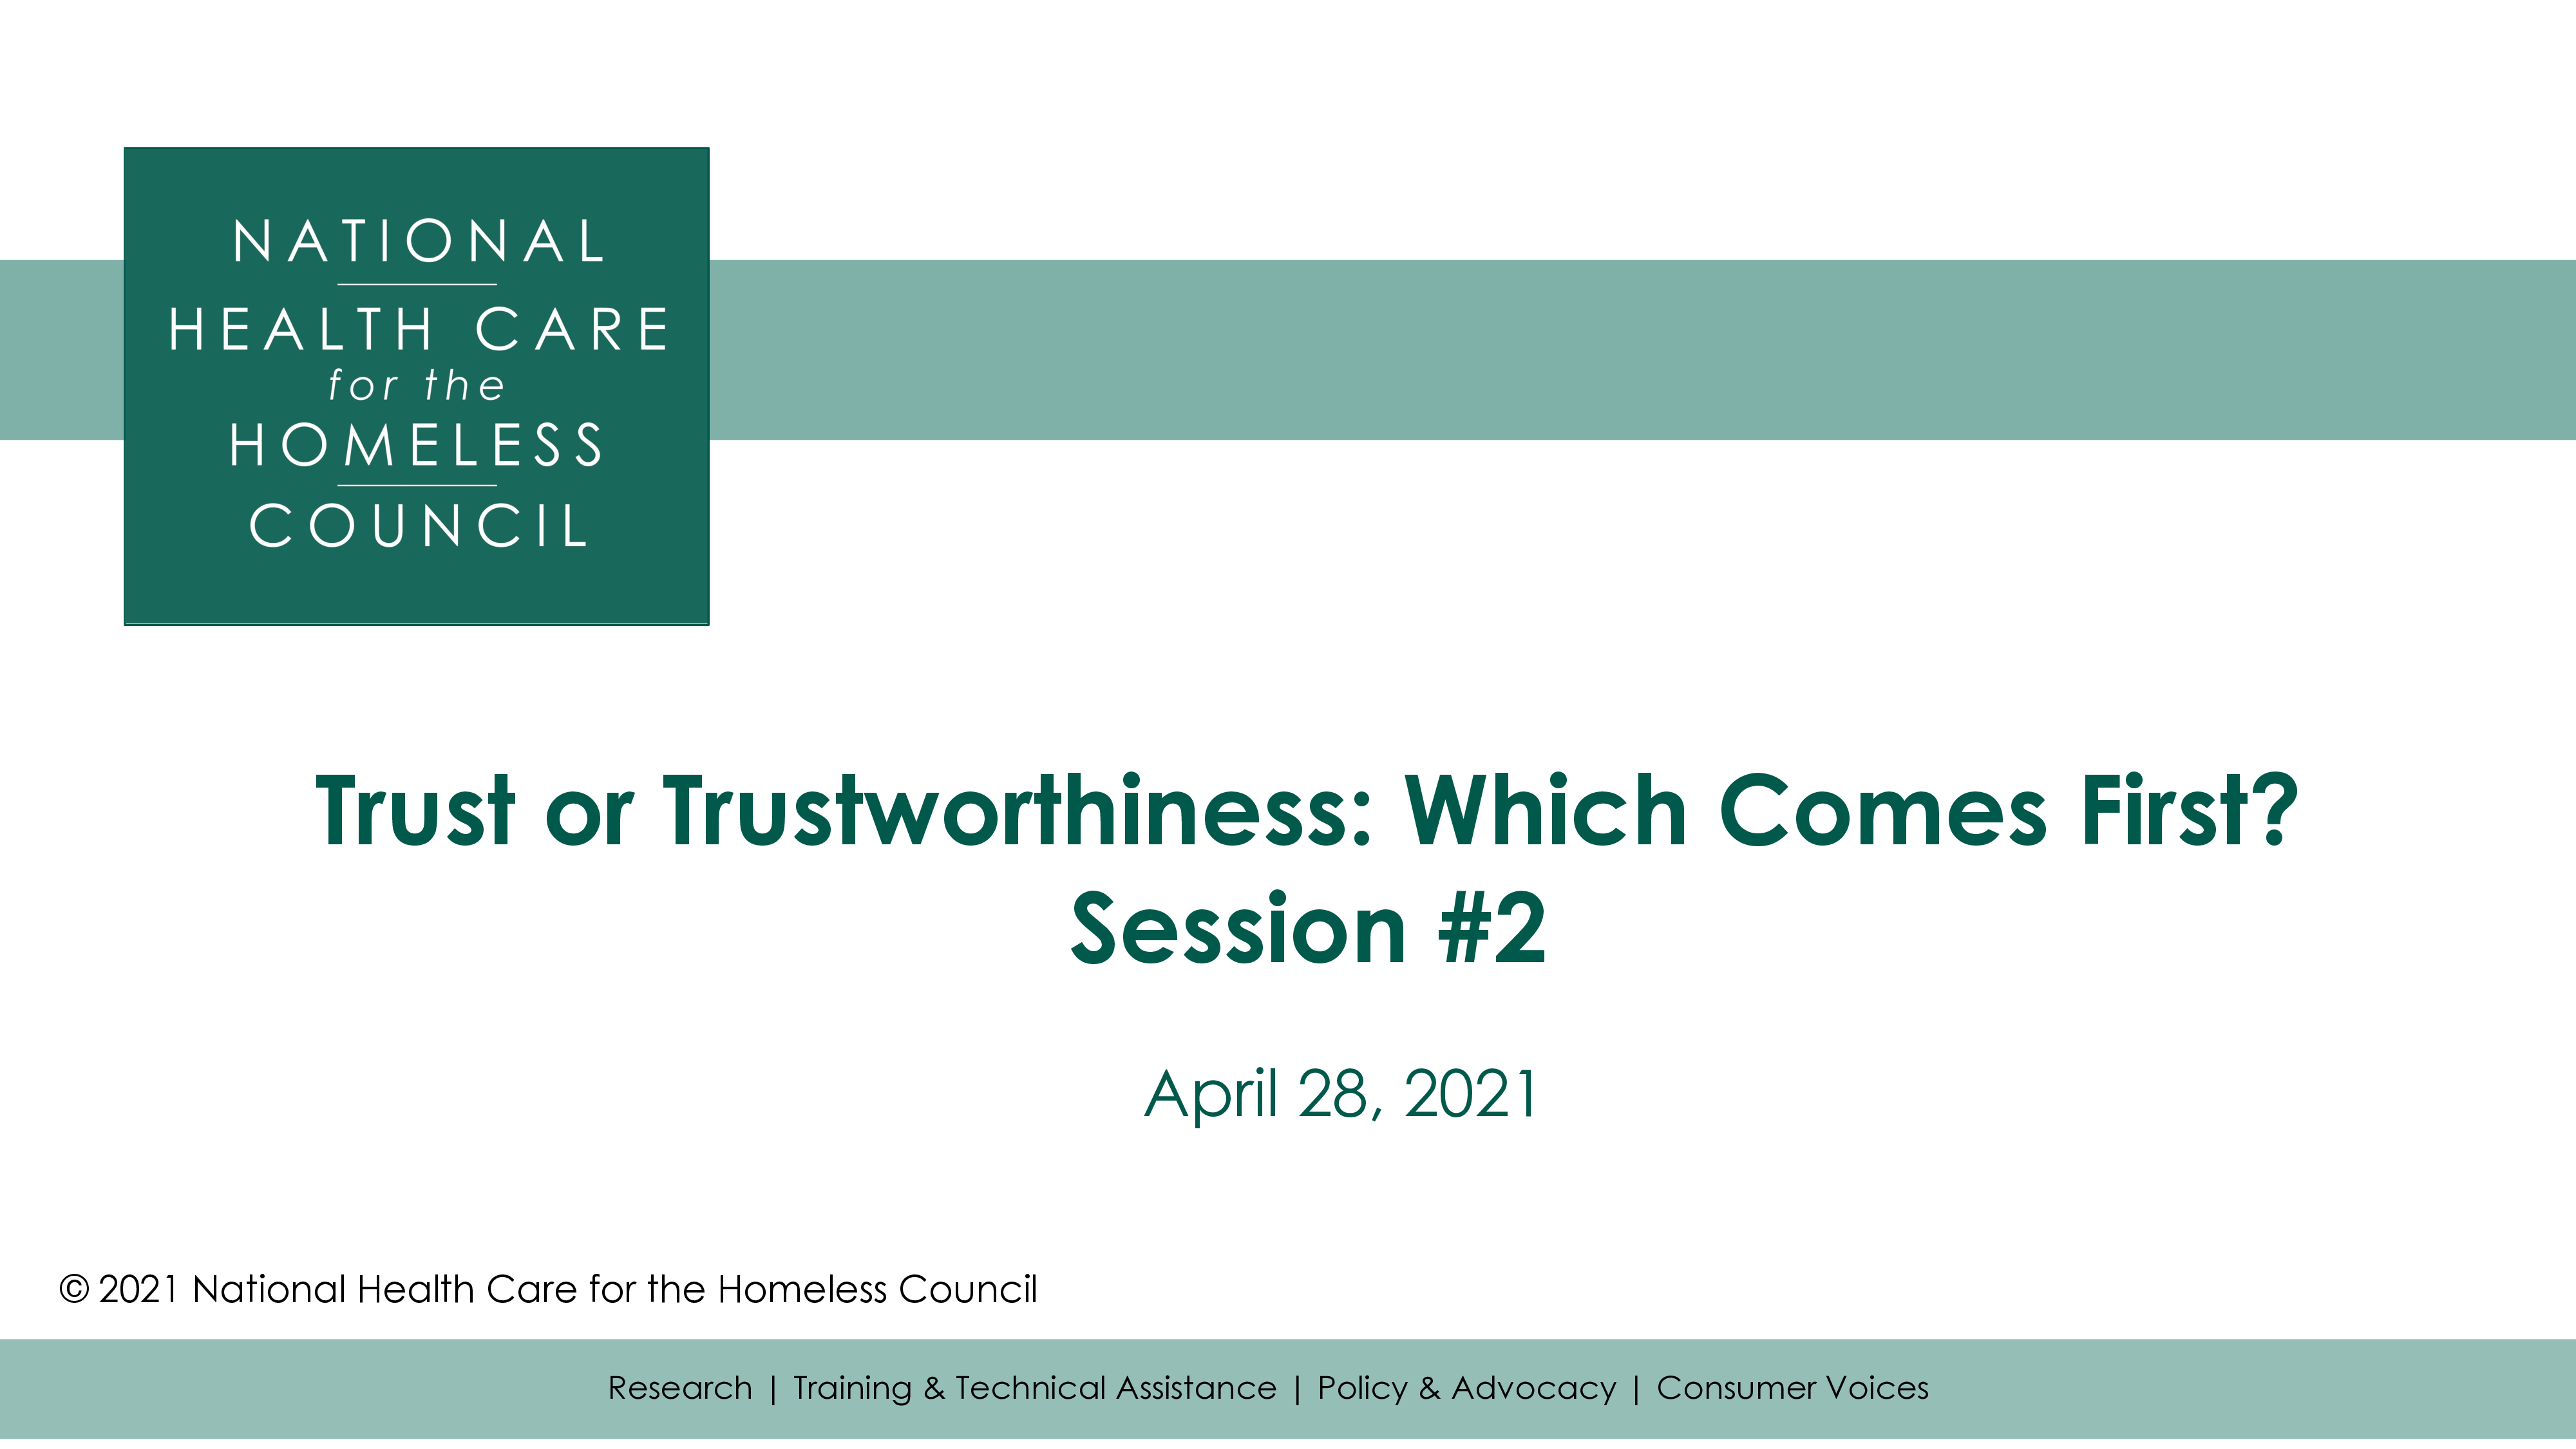 Title page of slides for "Trust or Trustworthiness: Which Comes First? Session #2 held on April 28, 2021